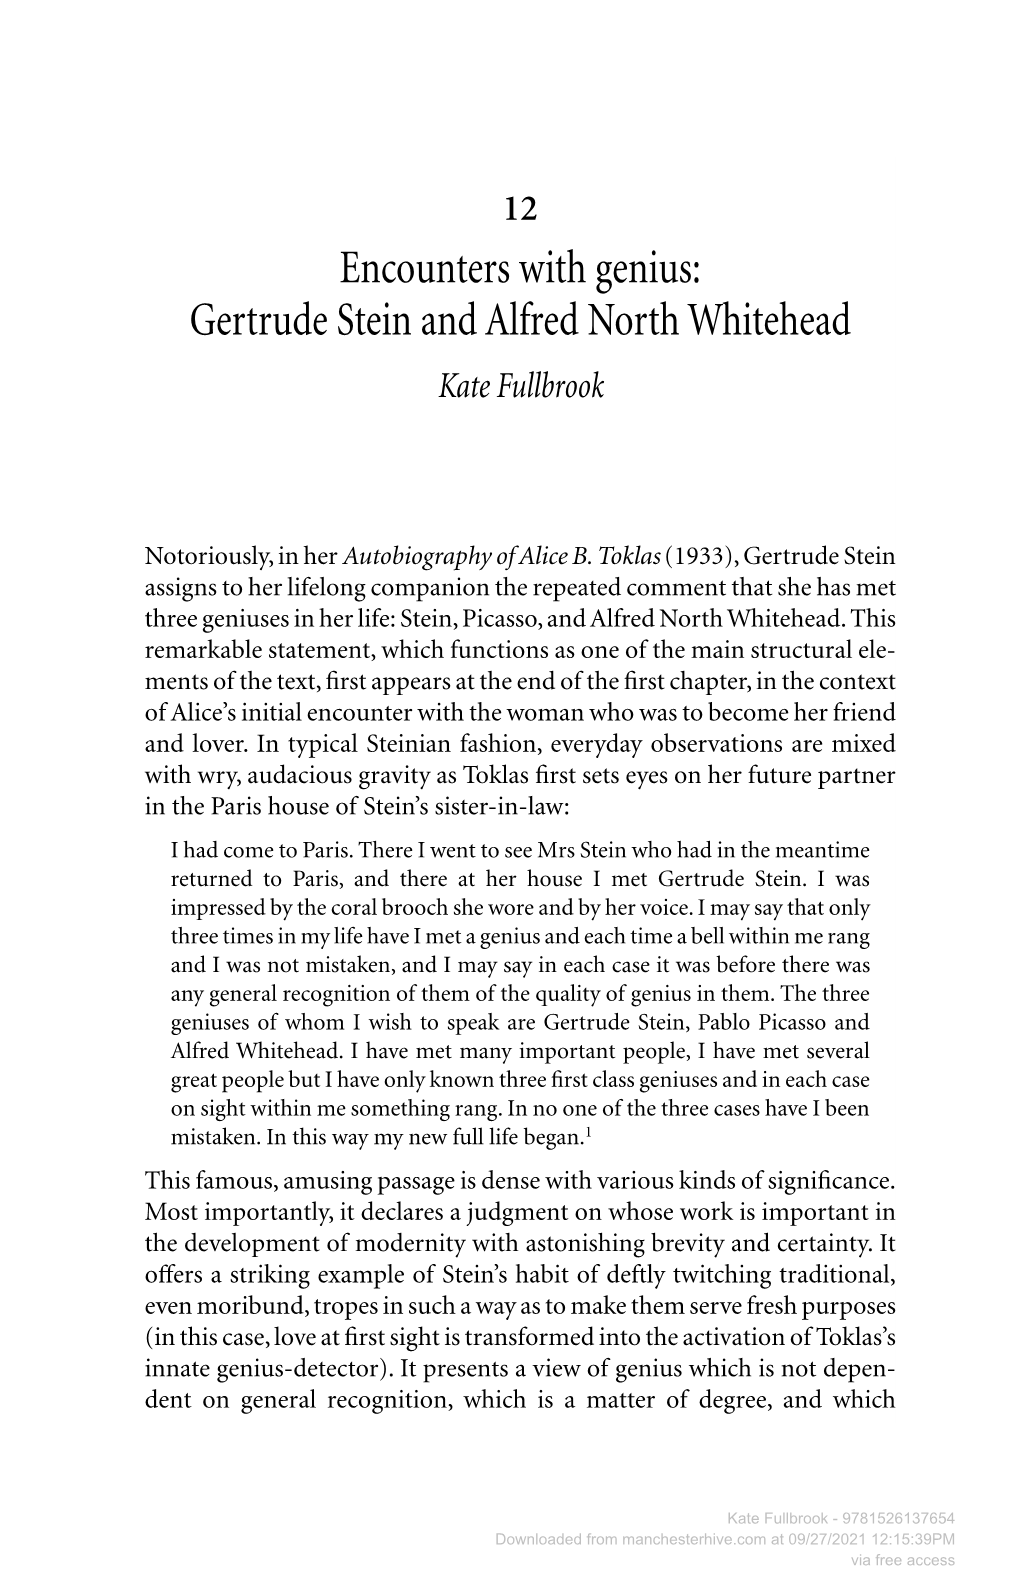 Gertrude Stein and Alfred North Whitehead Kate Fullbrook